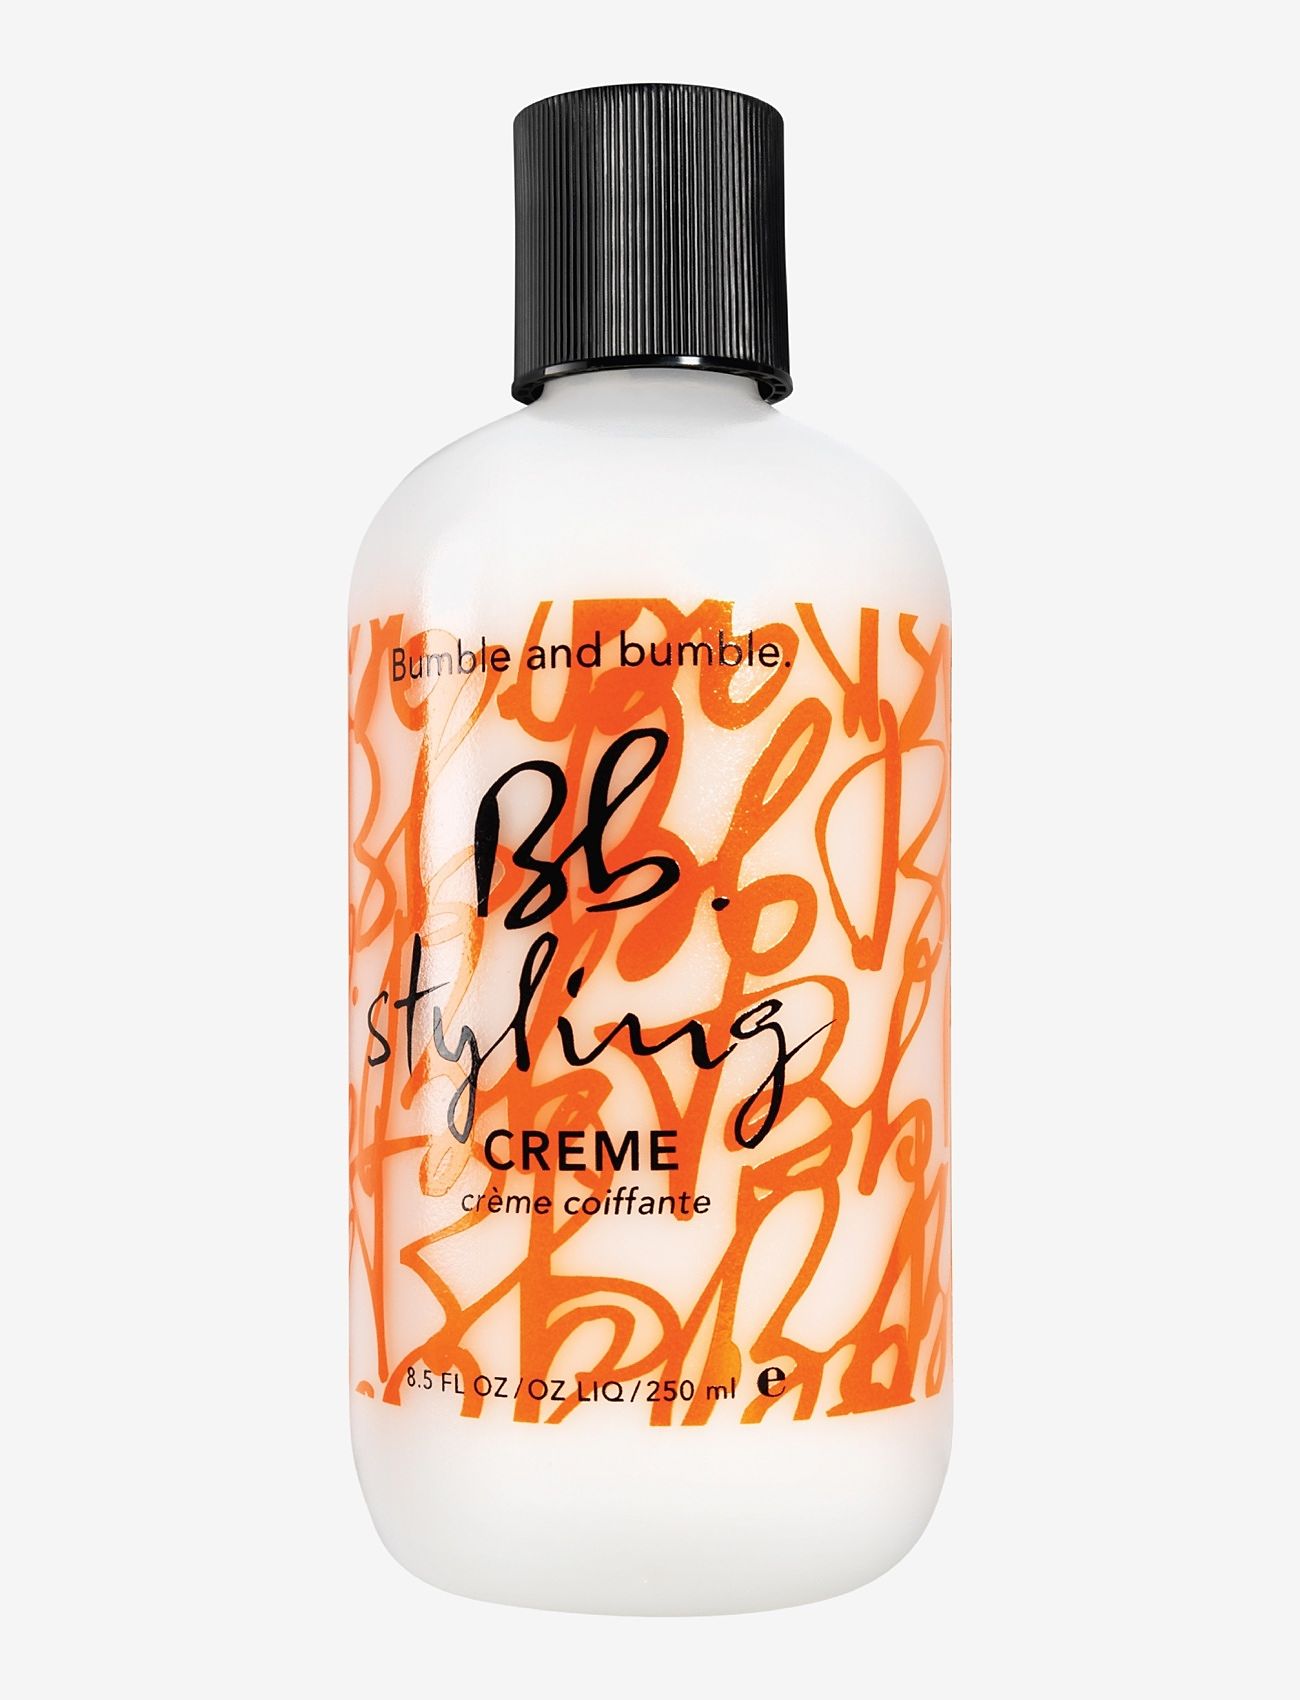 Bumble and Bumble - Styling Creme - cream - no color - 0